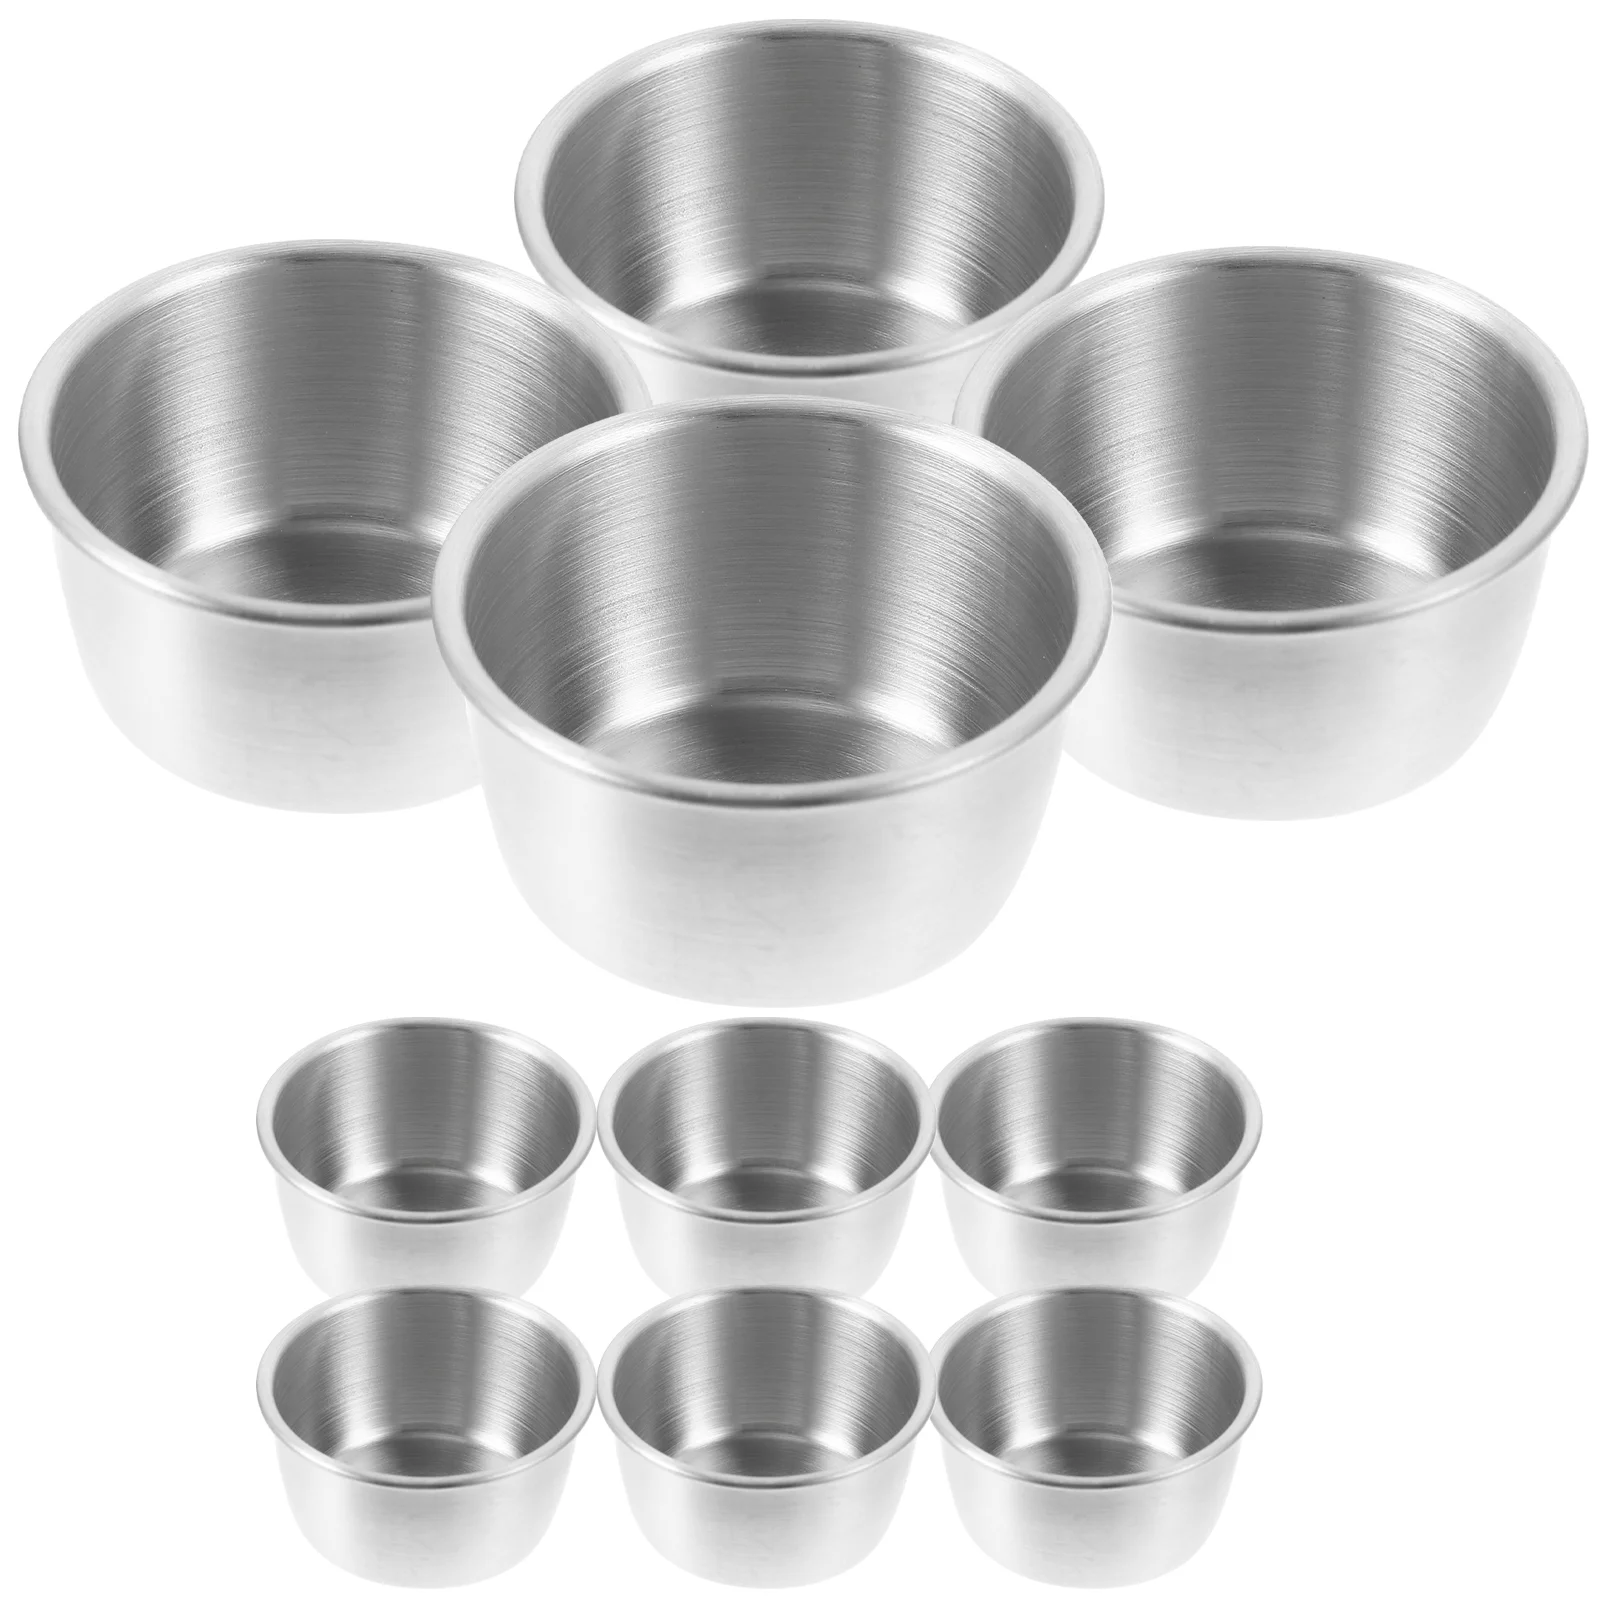 

10PCS Stainless Steel Sauce Dishes, Appetizer Plates, Round Seasoning Dishes, Saucers Bowl, Sushi Dipping Bowl, Saucers Bowl